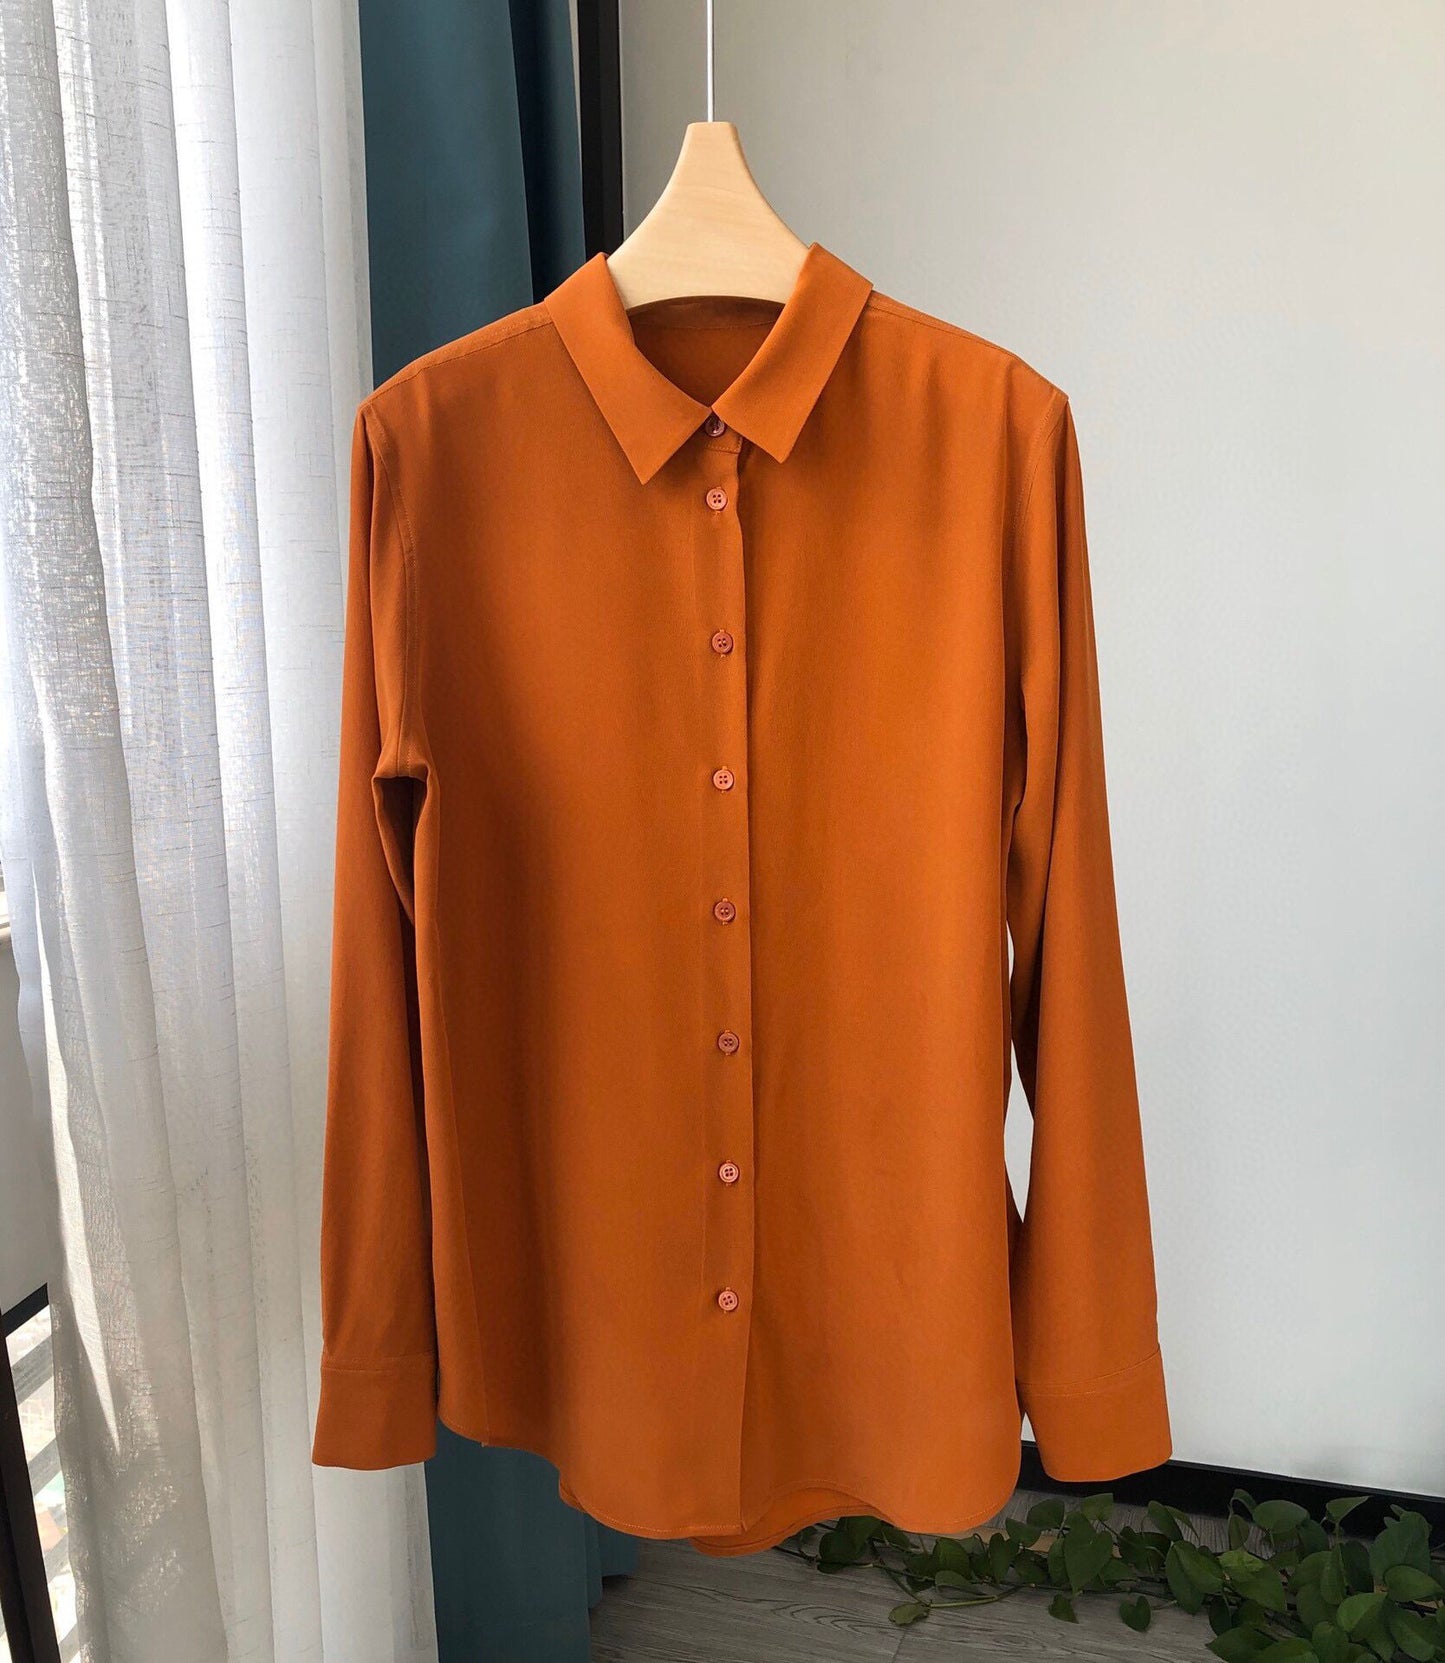 Silk Shirt for Women, Pure Color Simple Long-Sleeved Tops for Ladies (No Pocket)